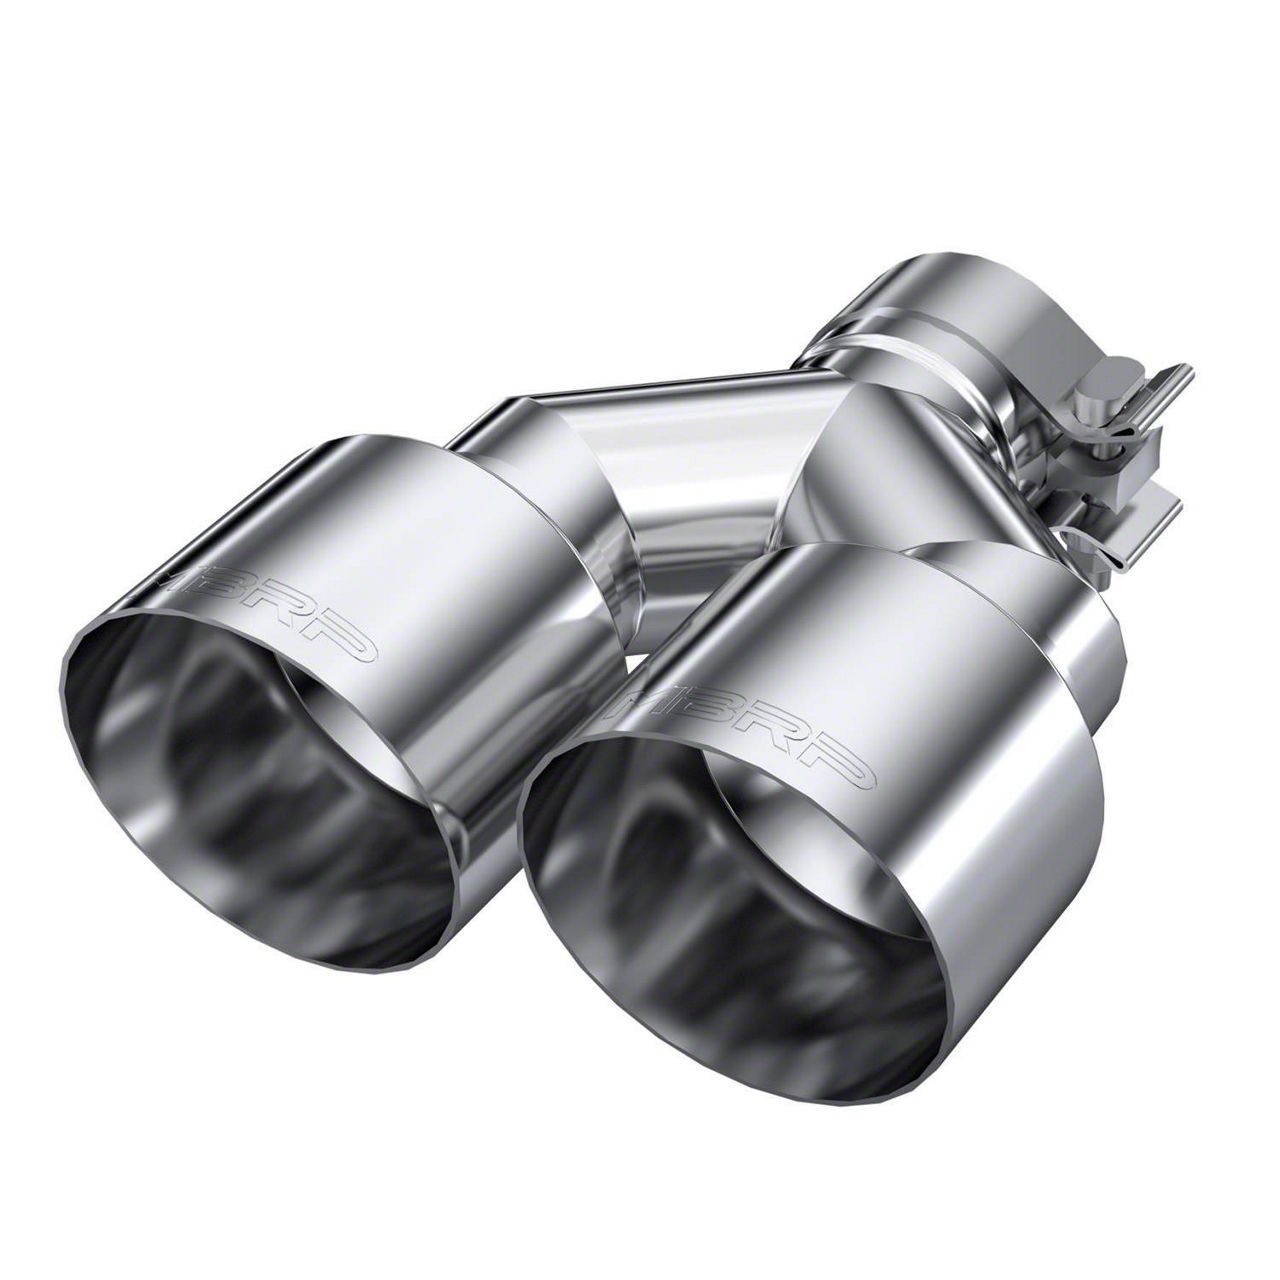 MBRP Tundra 4Inch Dual Exhaust Tip; Polished T5177 (Fits 2.50Inch